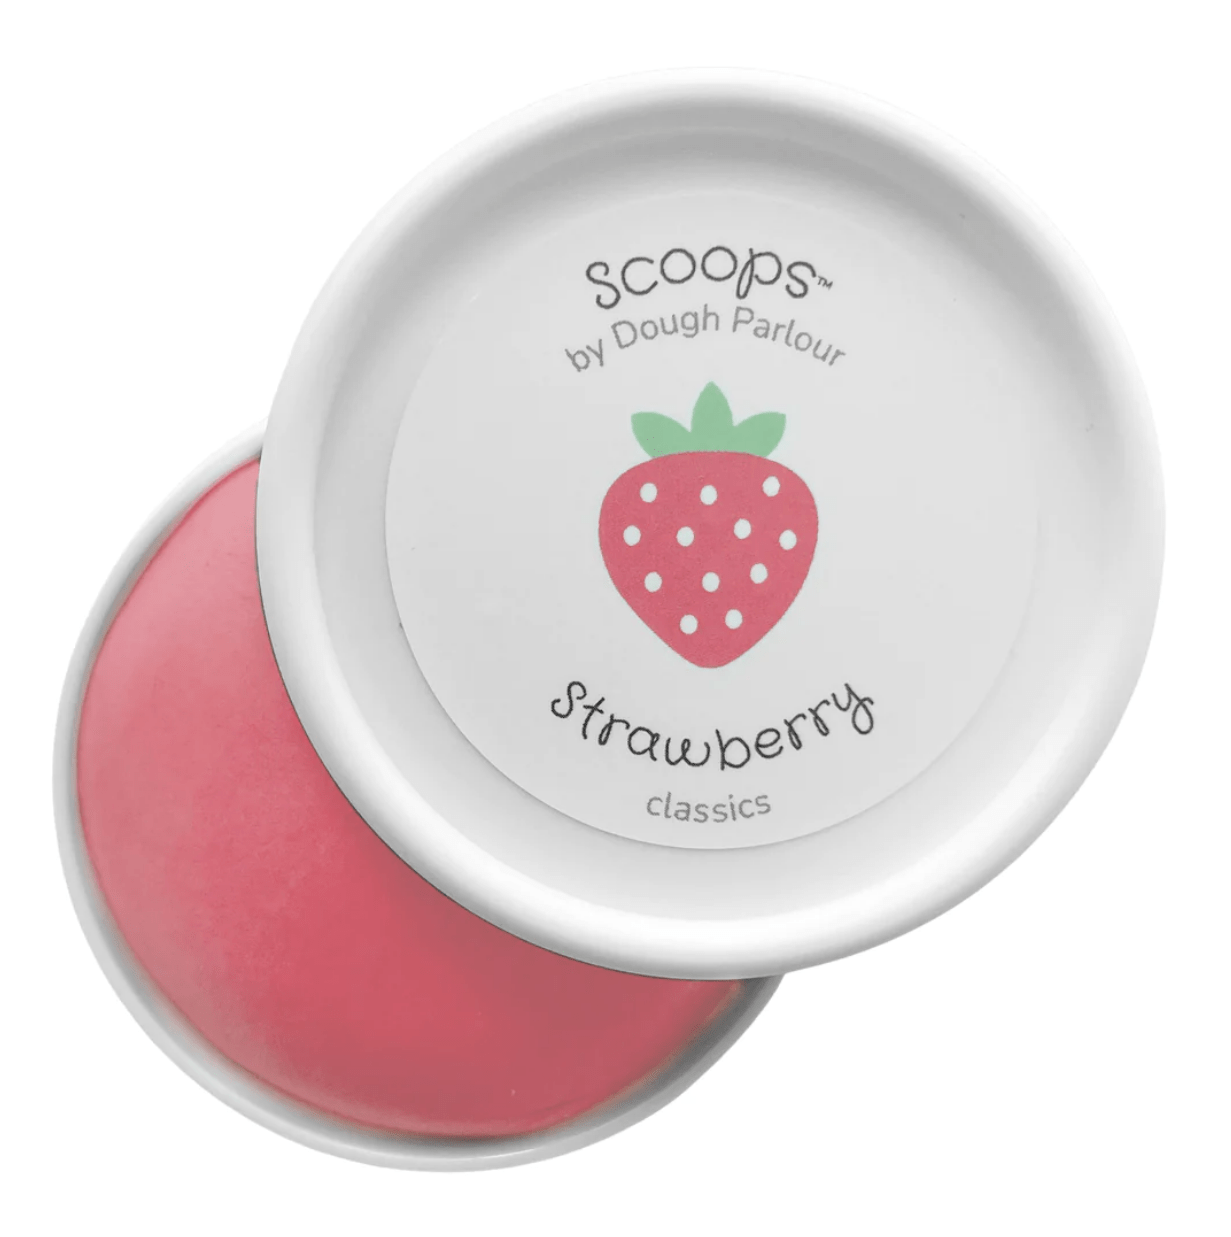 Dough Parlour Sensory Play Scoops® Strawberry Scented Dough (Made in Canada) Strawberry Scented Play Dough | Handcrafted in Canada